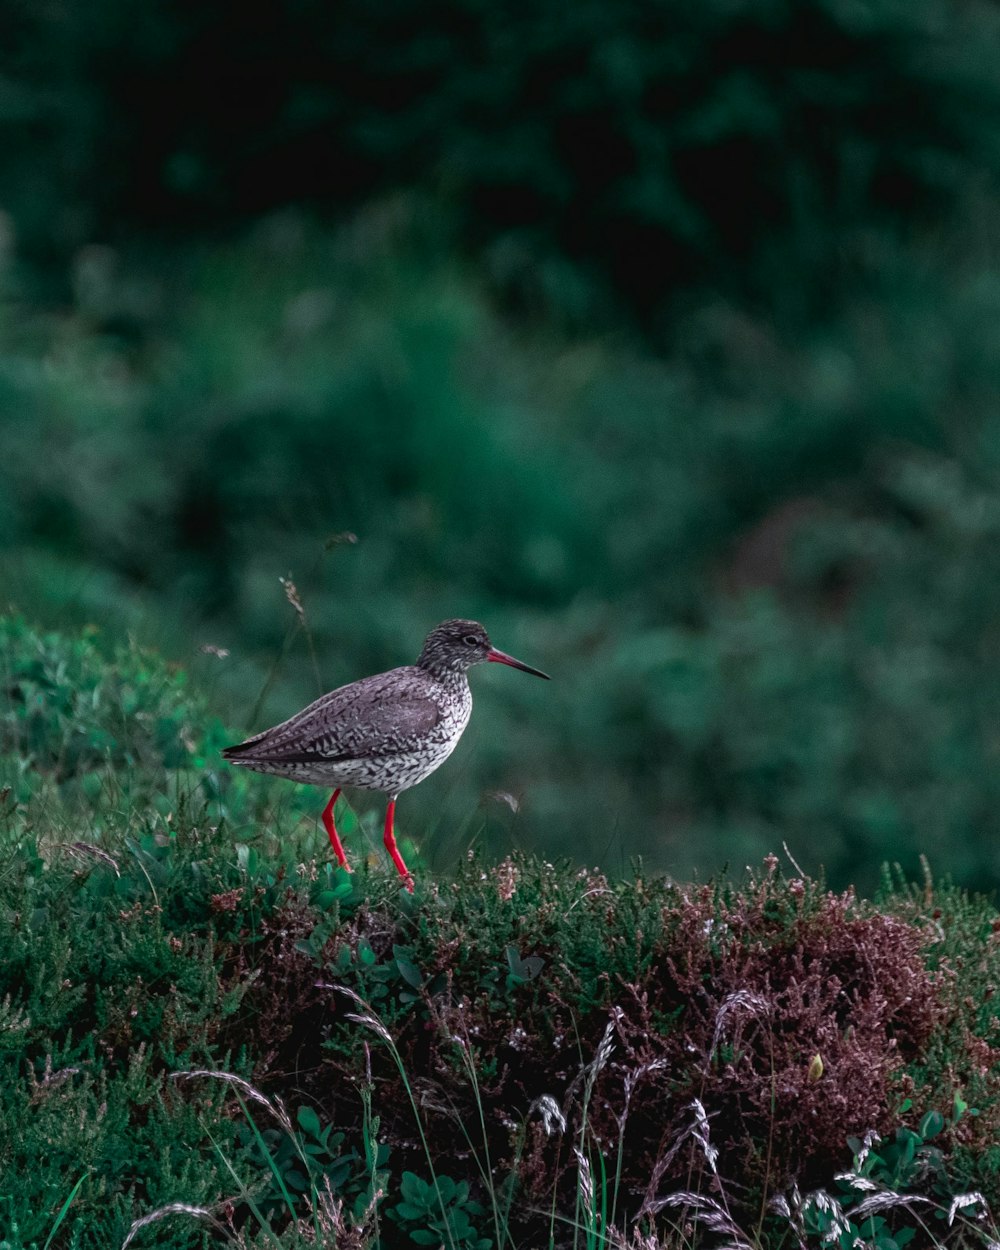 a small bird standing on a patch of grass